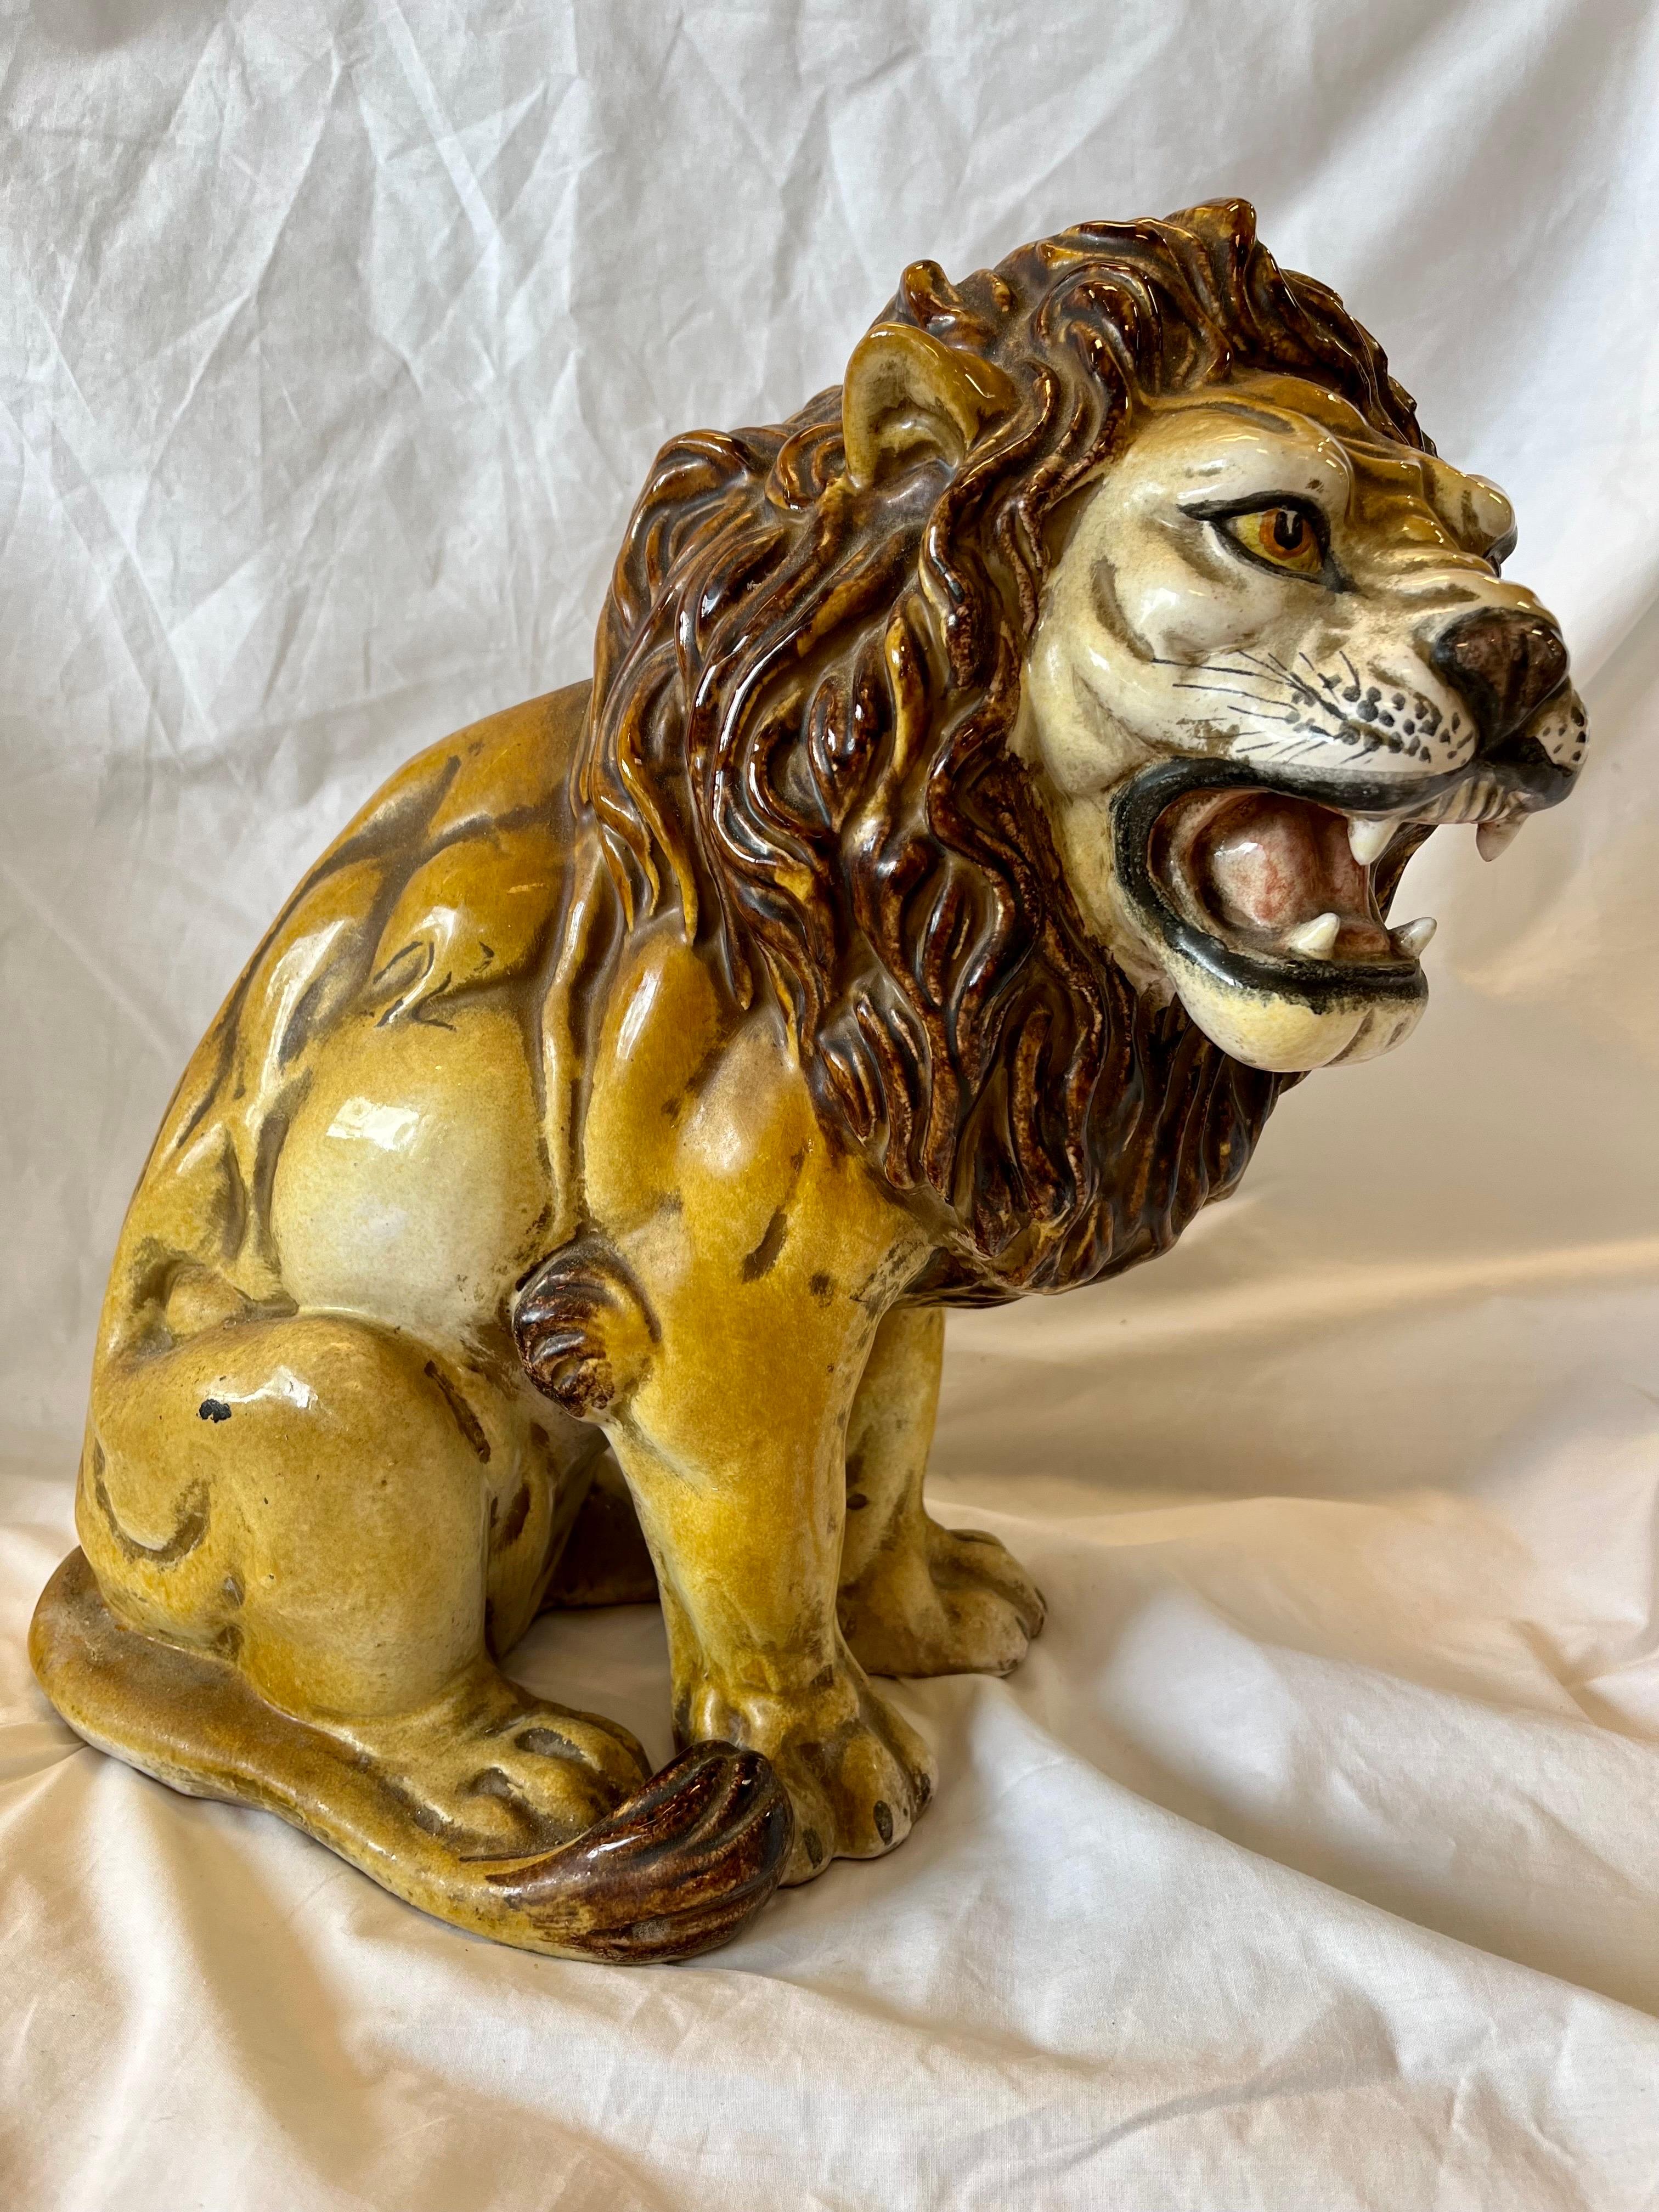 A truly fierce Italian midcentury representation of the King of the Jungle. This Leo made from sculpted and hand formed terra cotta with a hand painted and glazed finish is ready to roar into your life. But you may be asking yourself, 'why is there